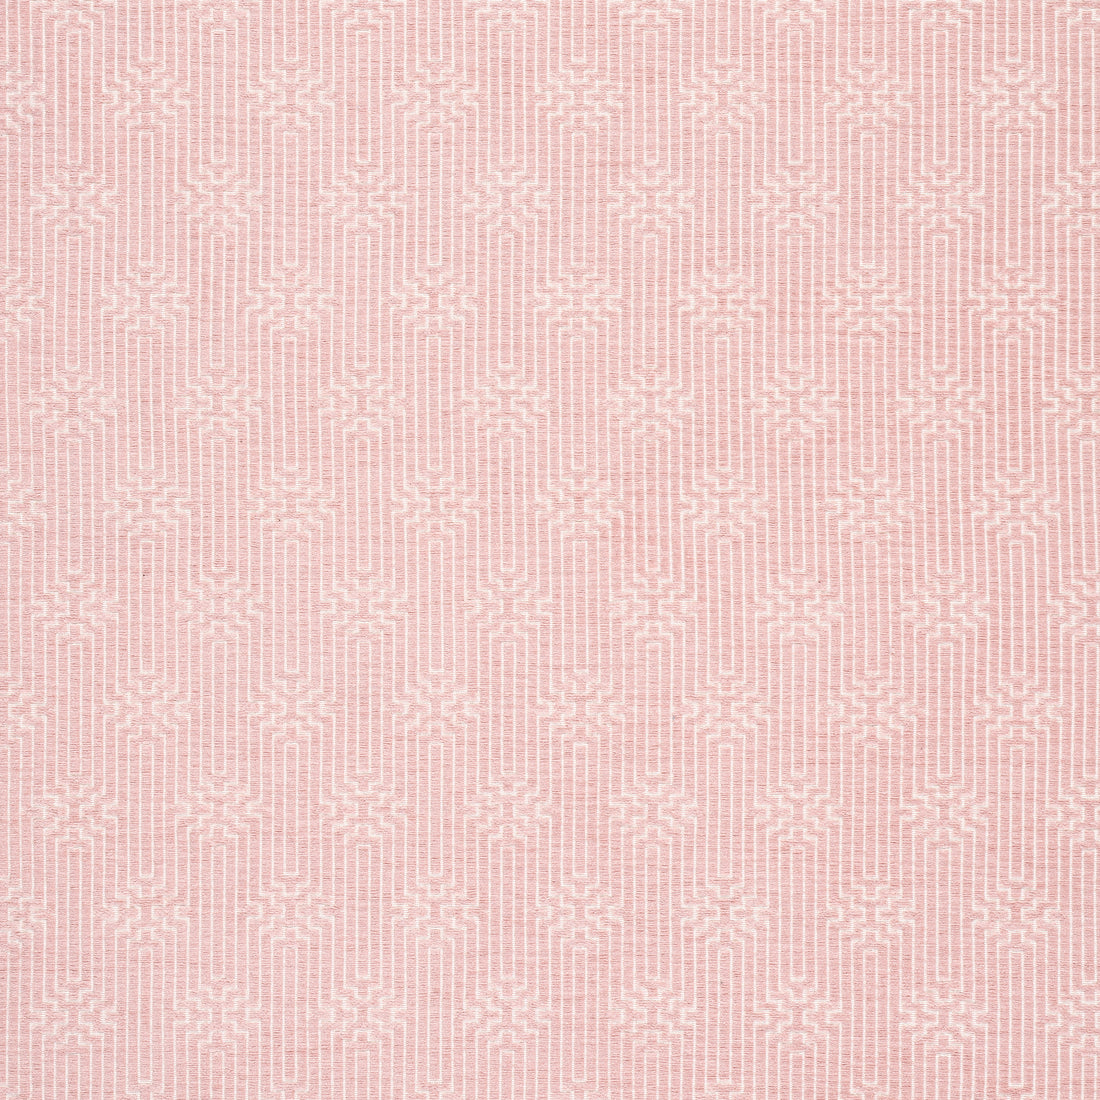 Crete fabric in blossom color - pattern number W74215 - by Thibaut in the Passage collection